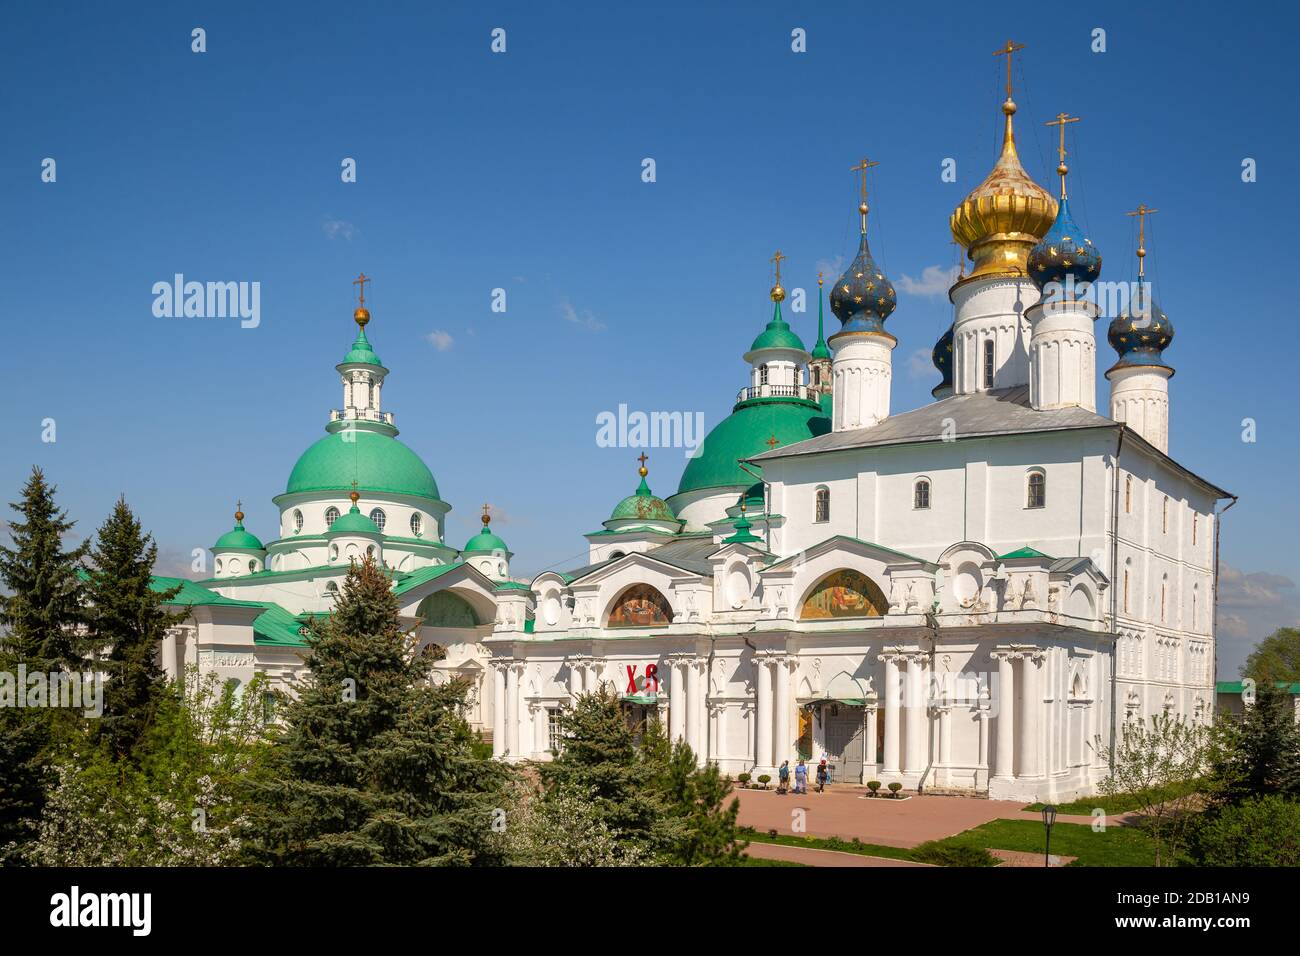 Spaso-Yakovlevsky Monastery. Cathedral of St Dimitry of Rostov, Church of St Iakov of Rostov and Church of  Conception of Anna (Zachatievsky Cathedral Stock Photo